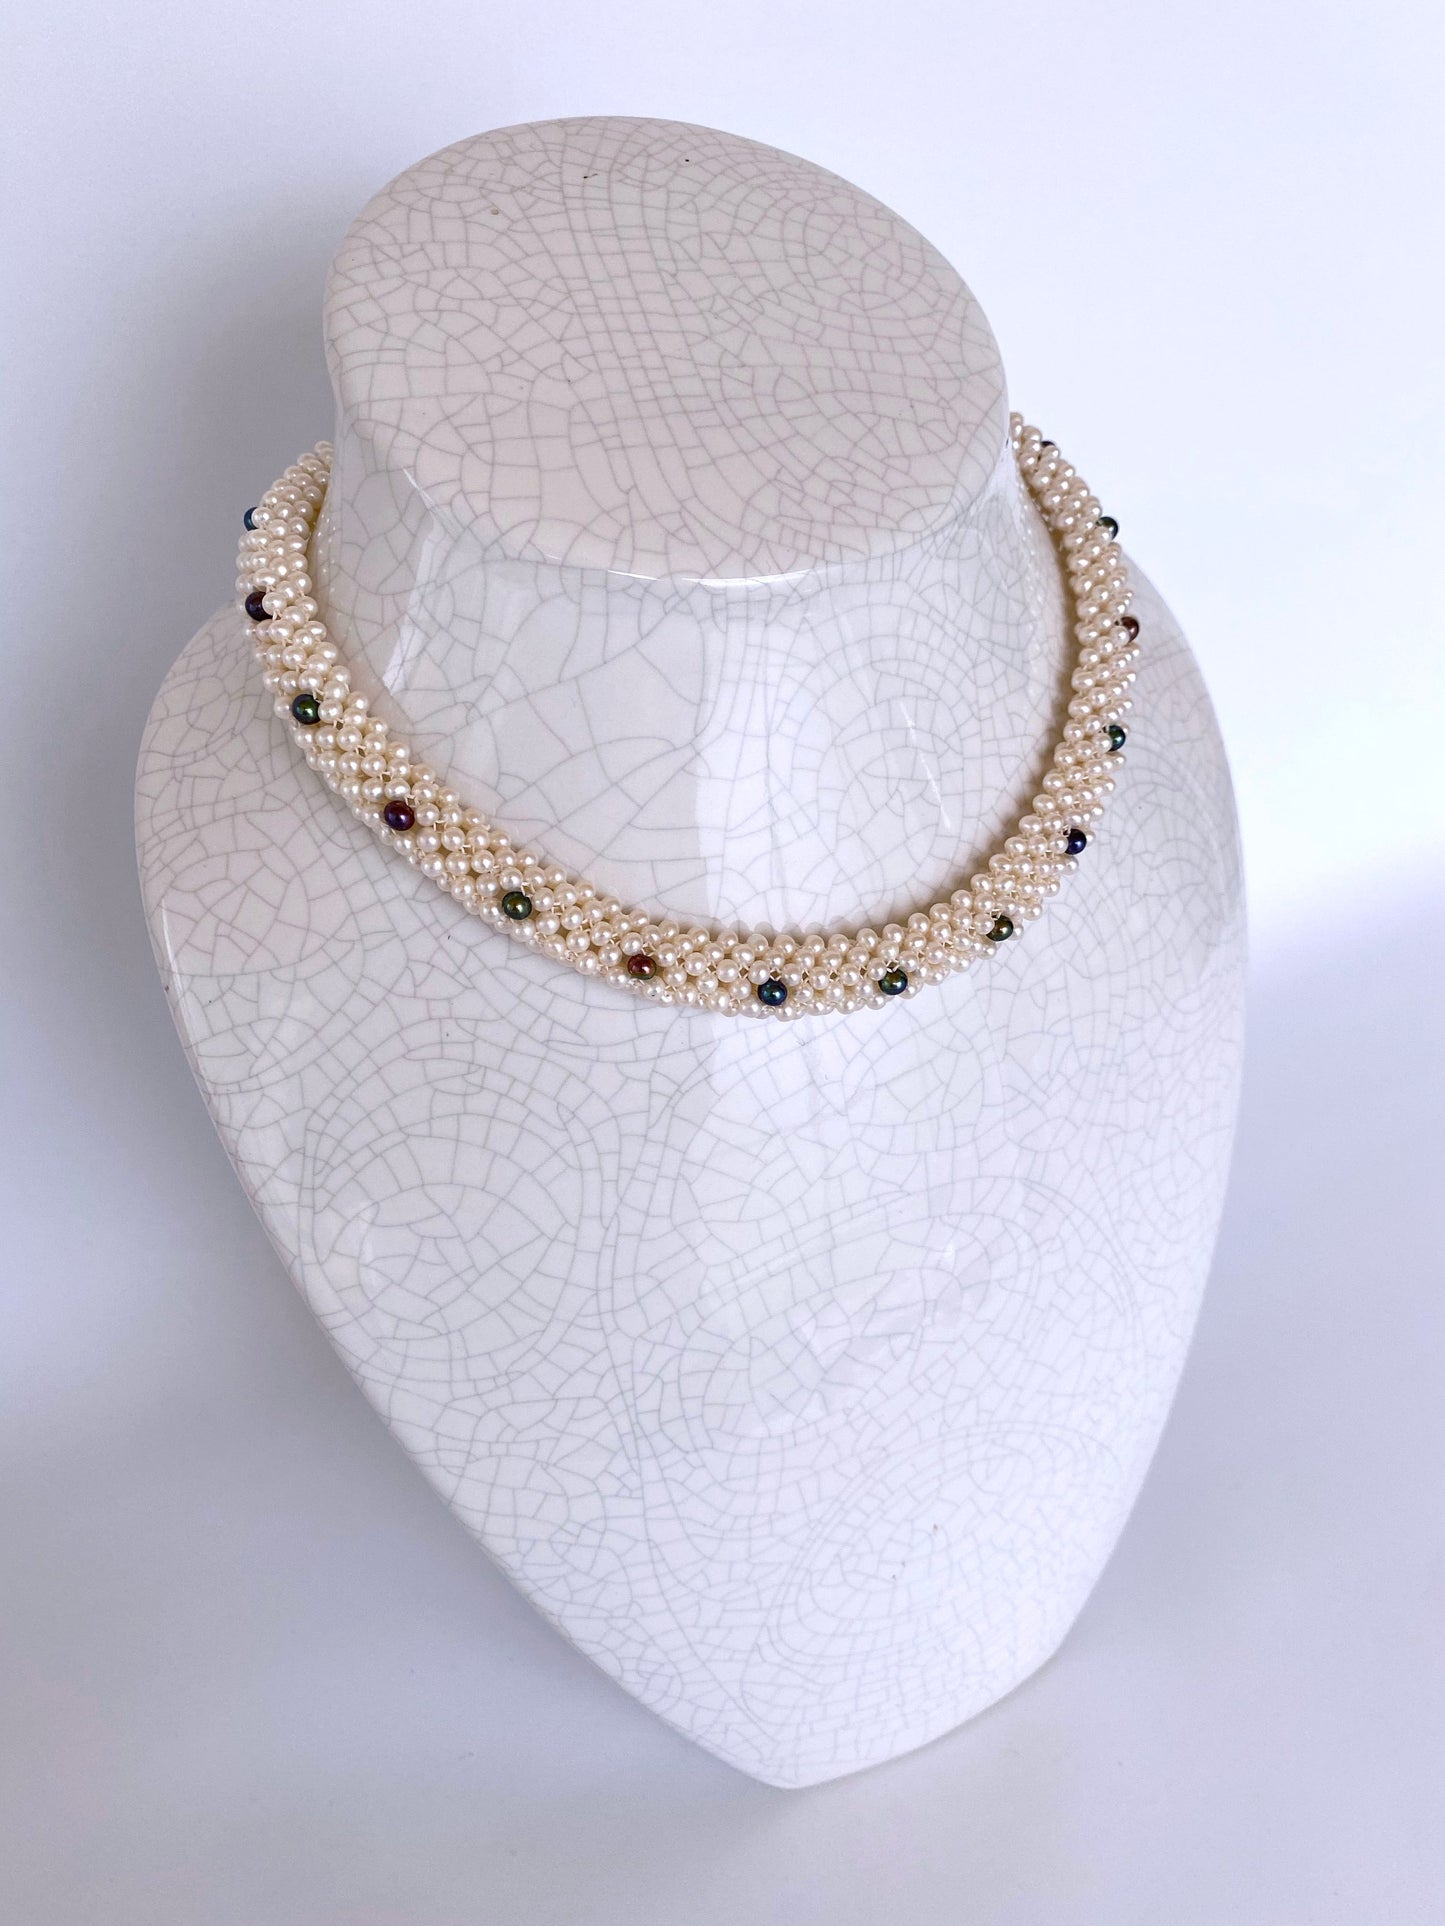 Woven Black & White Pearl Rope Necklace with 14K Yellow Gold Clasp